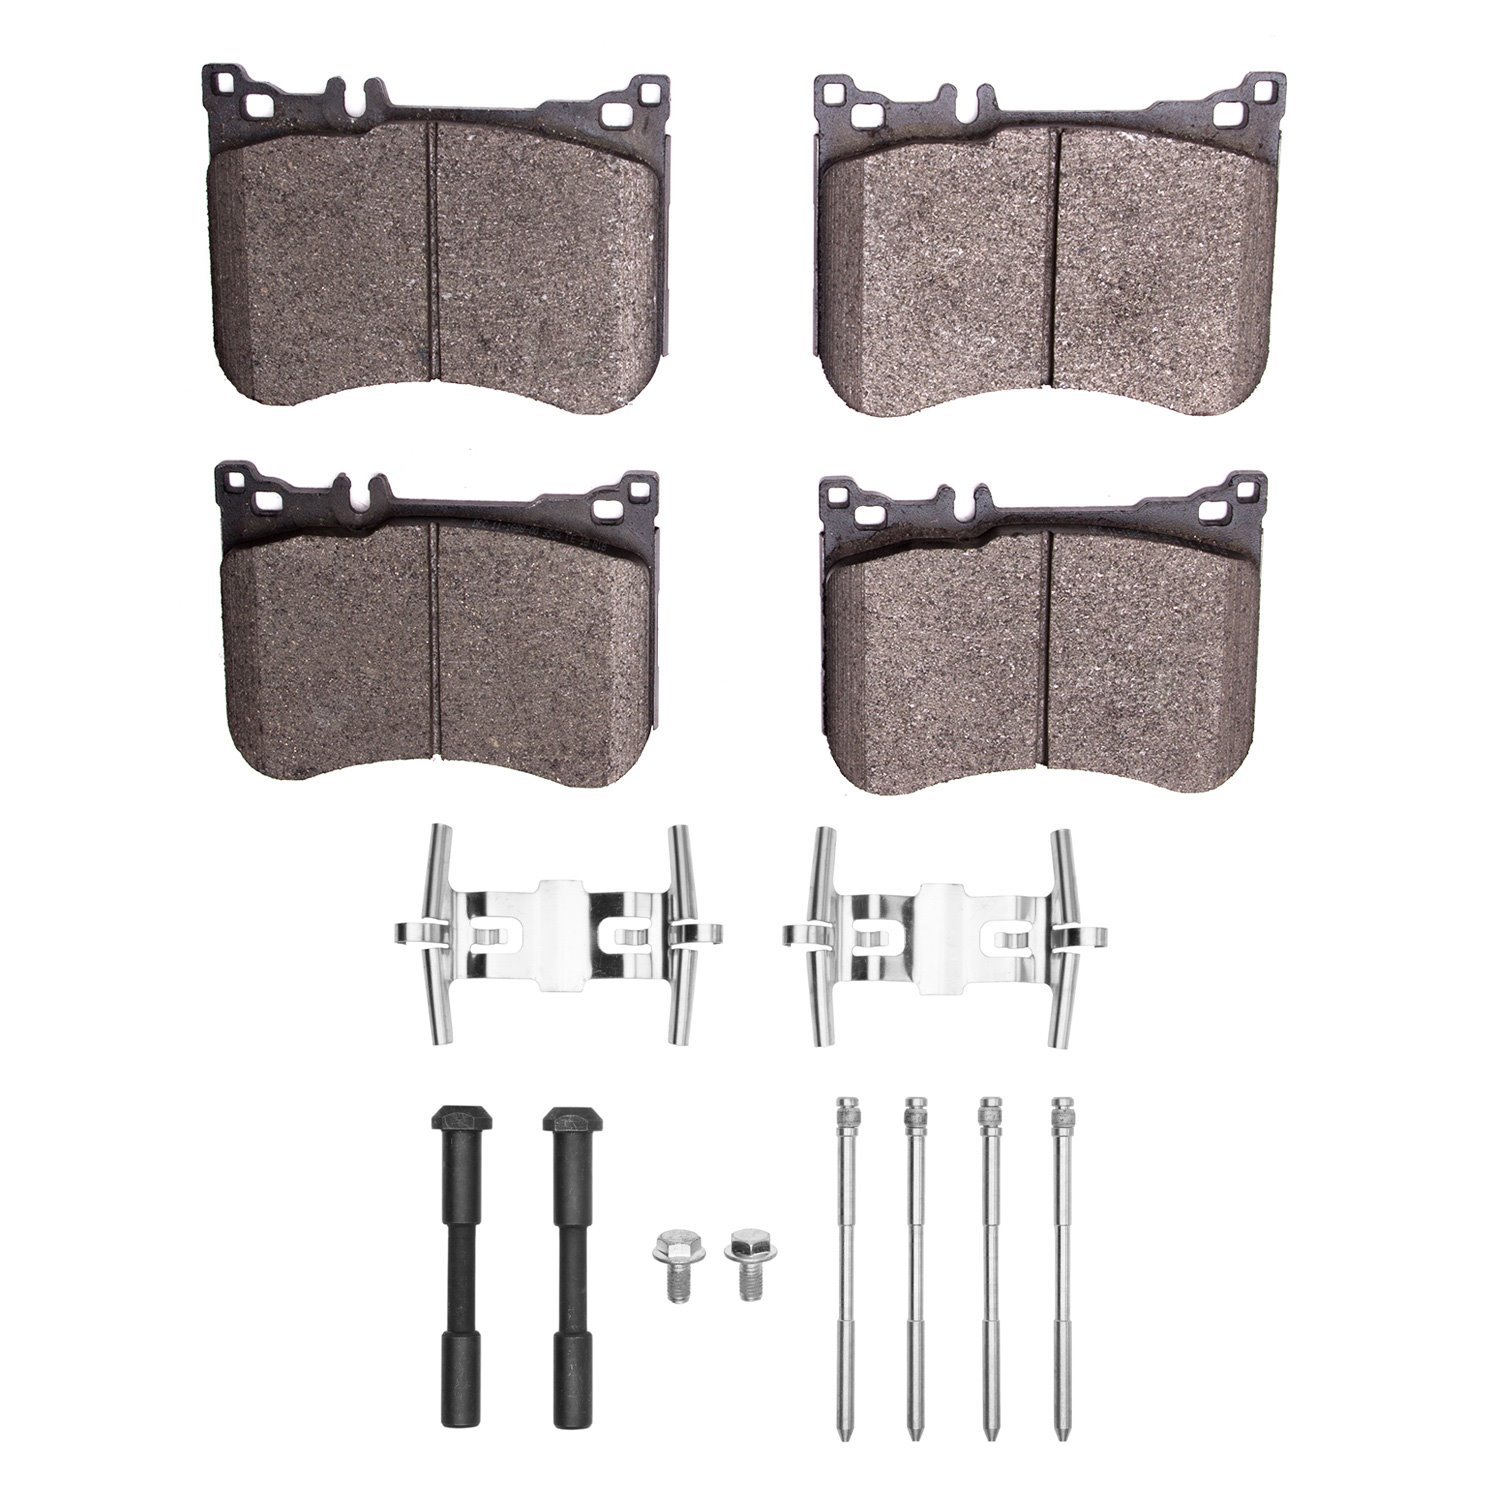 1551-1688-01 5000 Advanced Low-Metallic Brake Pads & Hardware Kit, Fits Select Mercedes-Benz, Position: Front